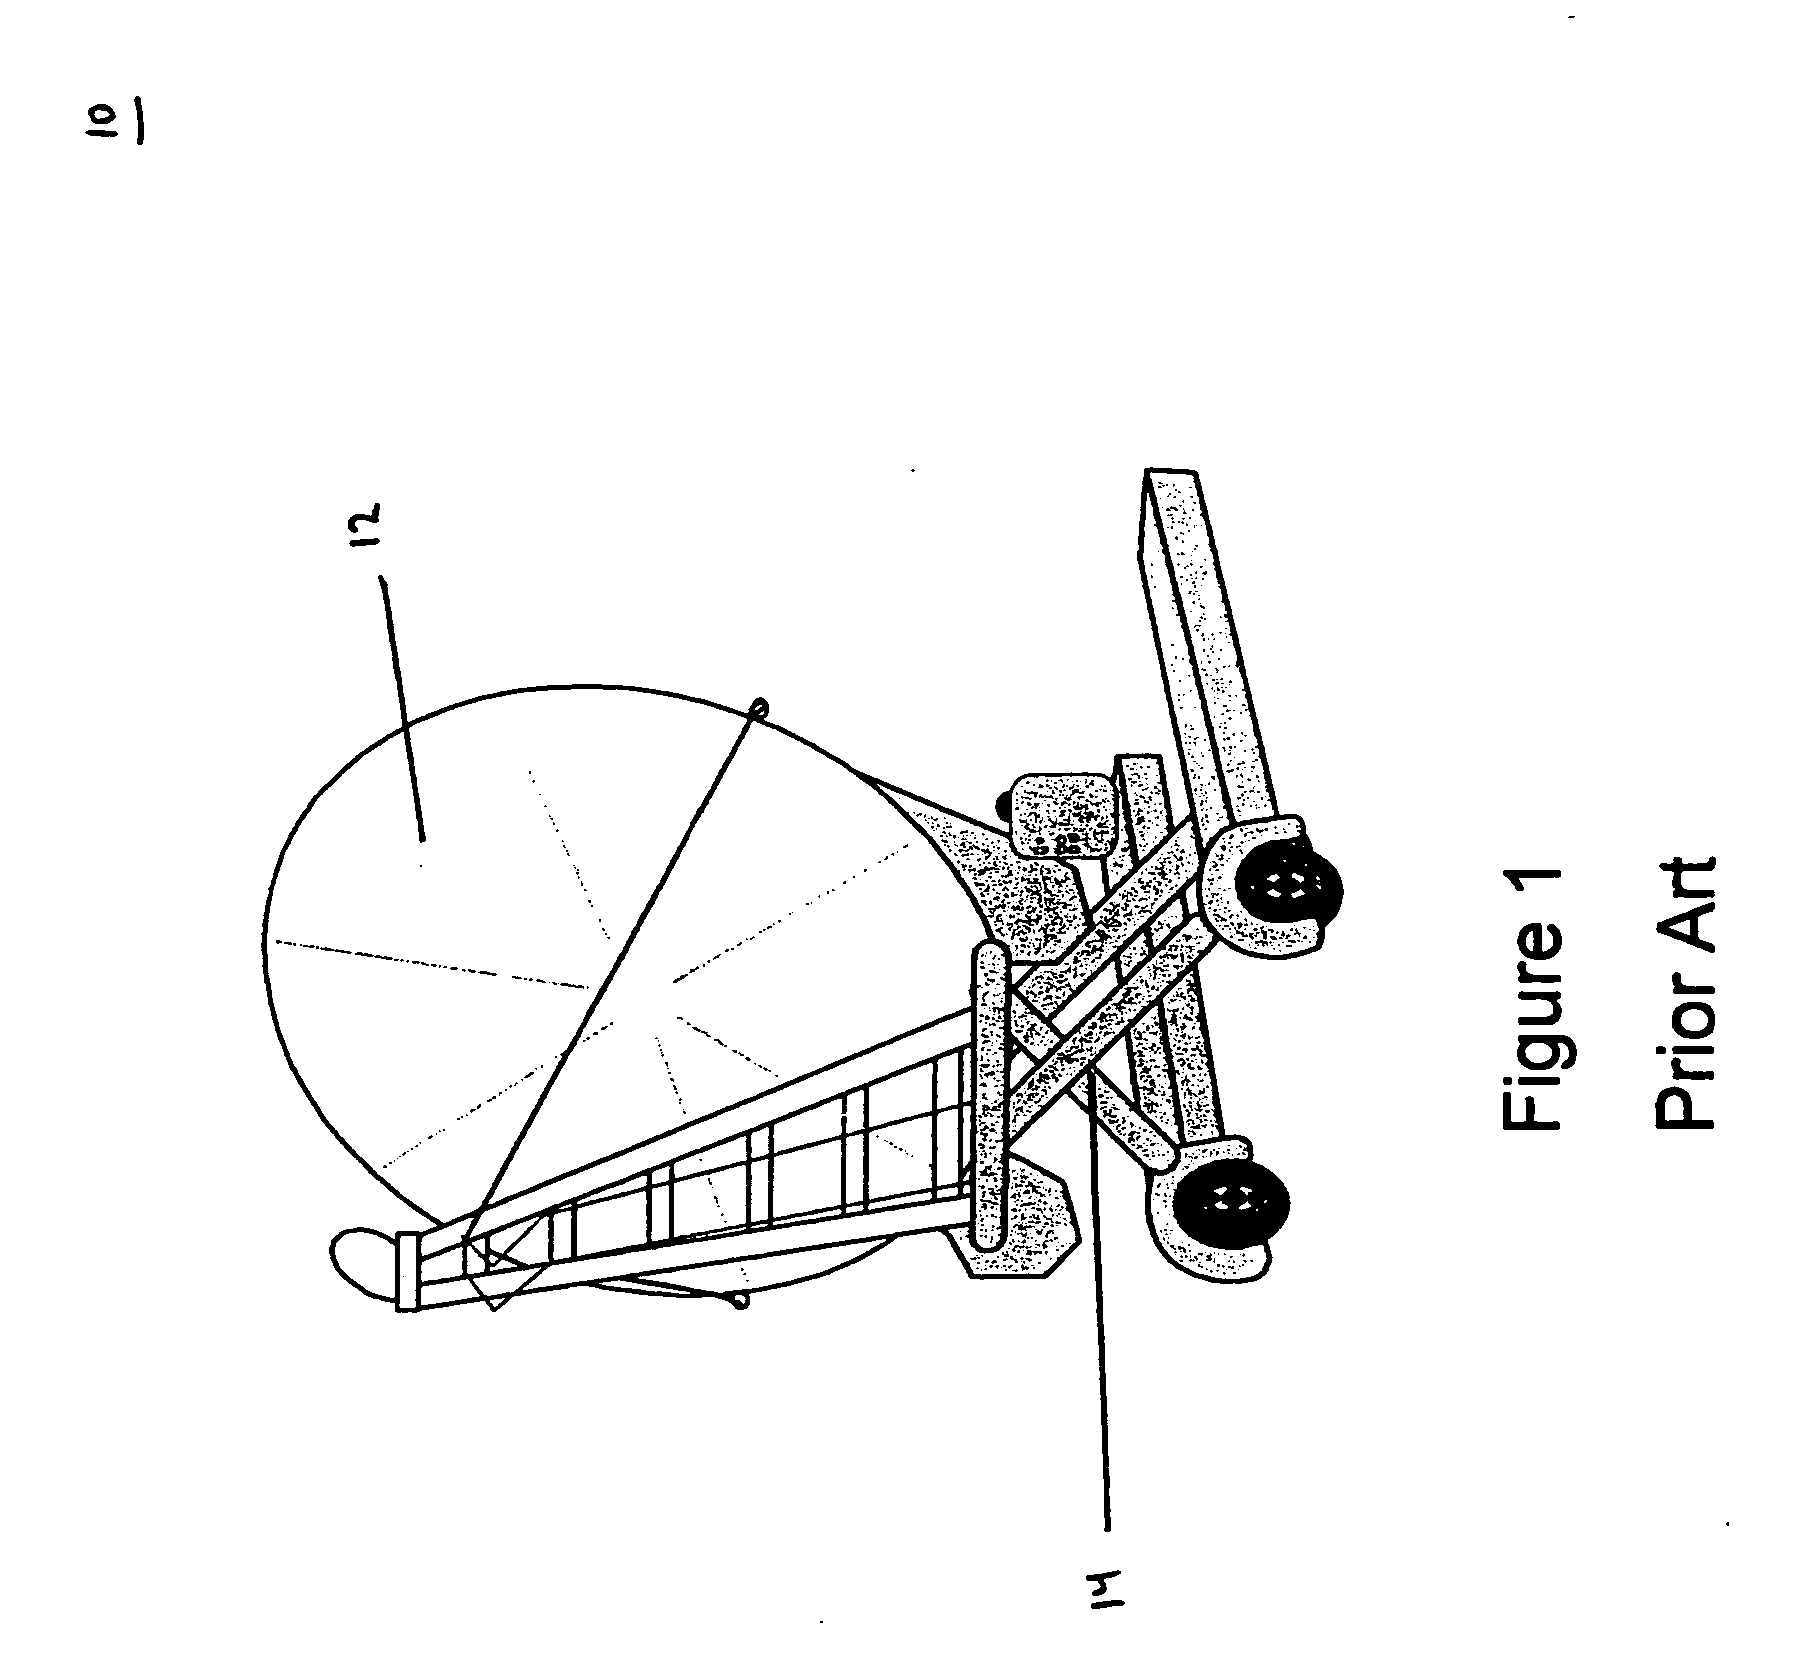 Ground based inflatable antenna